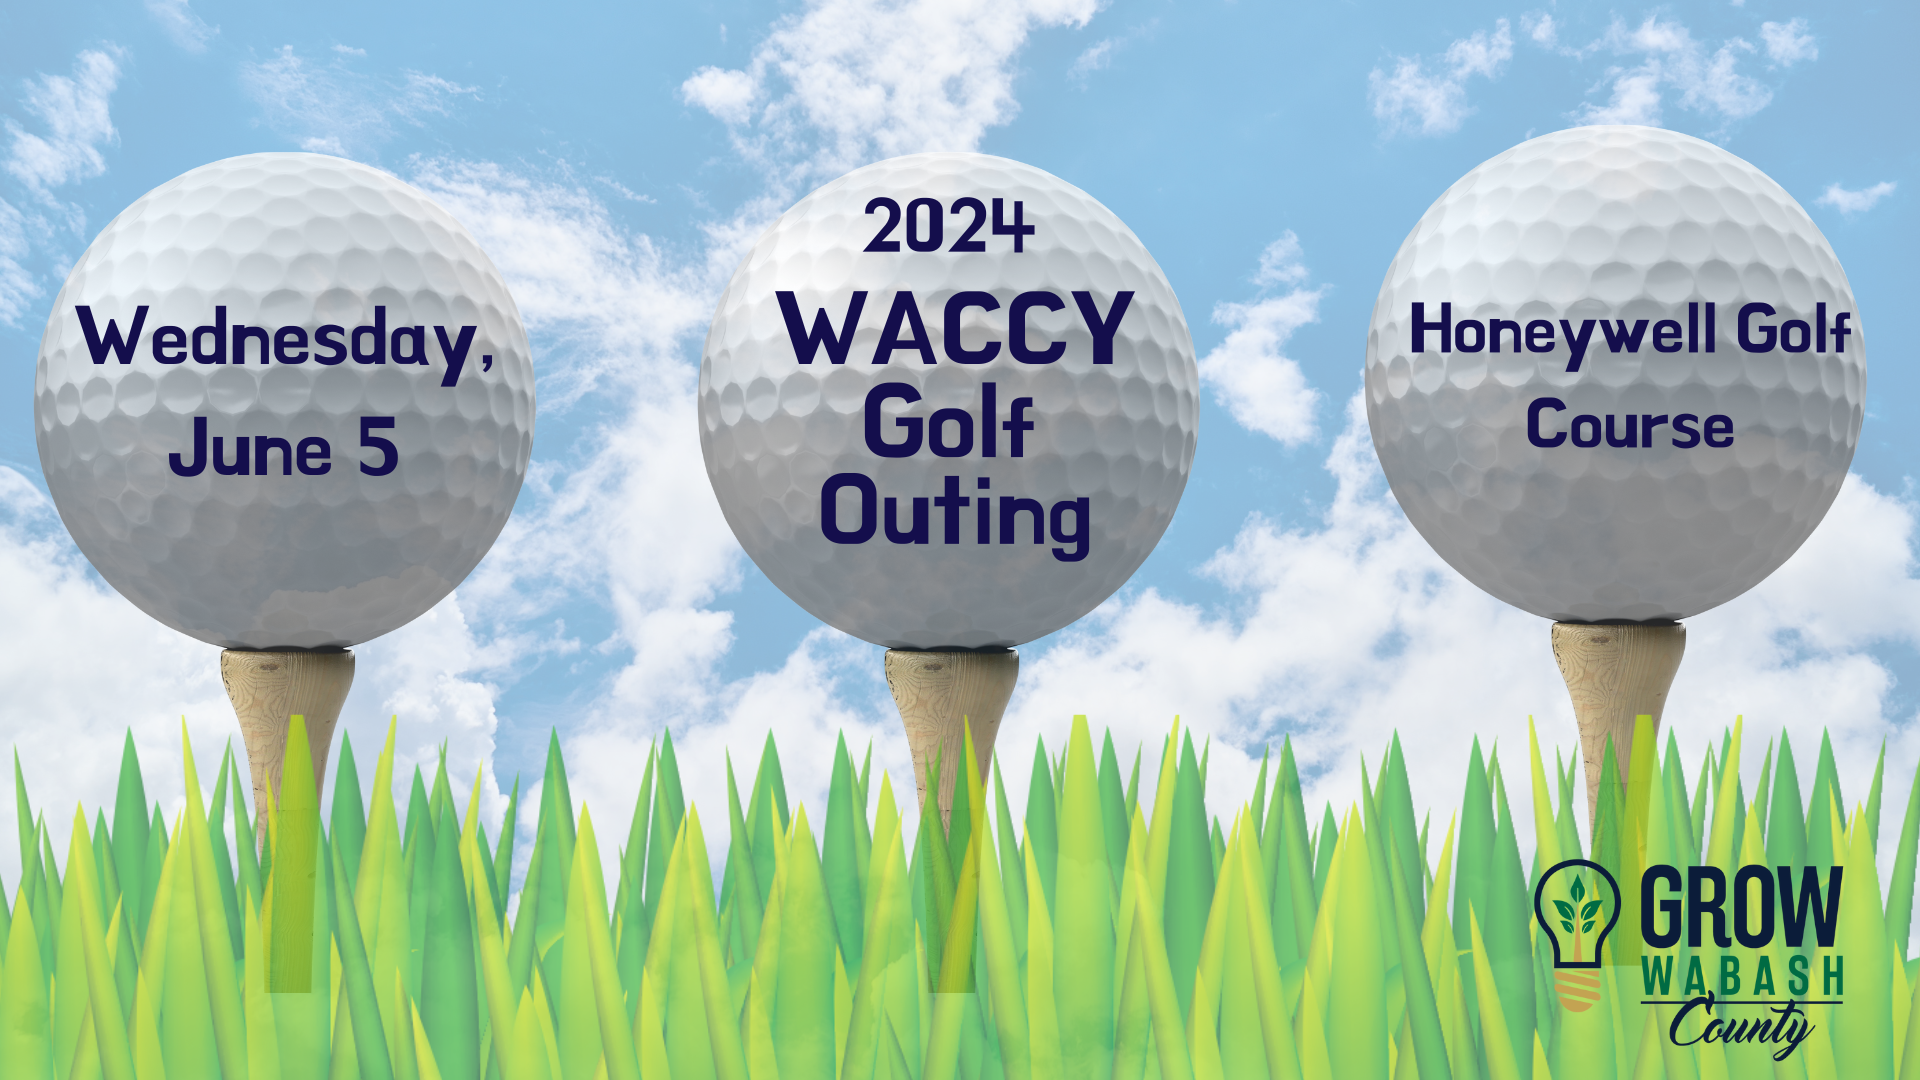 WACCY Golf Outing returns June 5 main photo